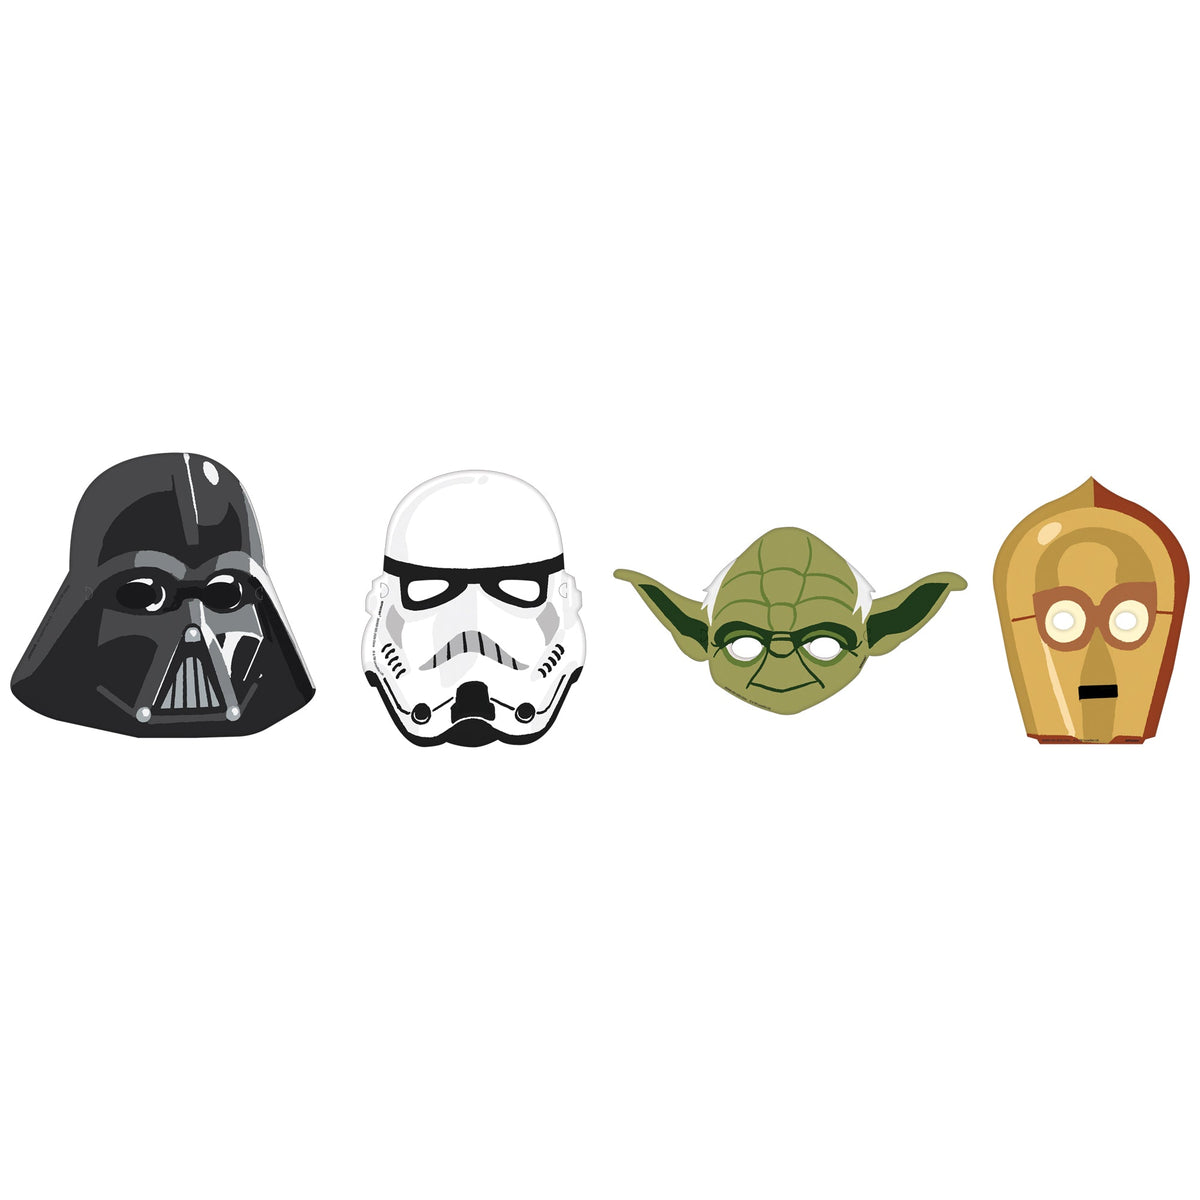 Star Wars™ Galaxy of Adventures package of 8 Paper Character Masks